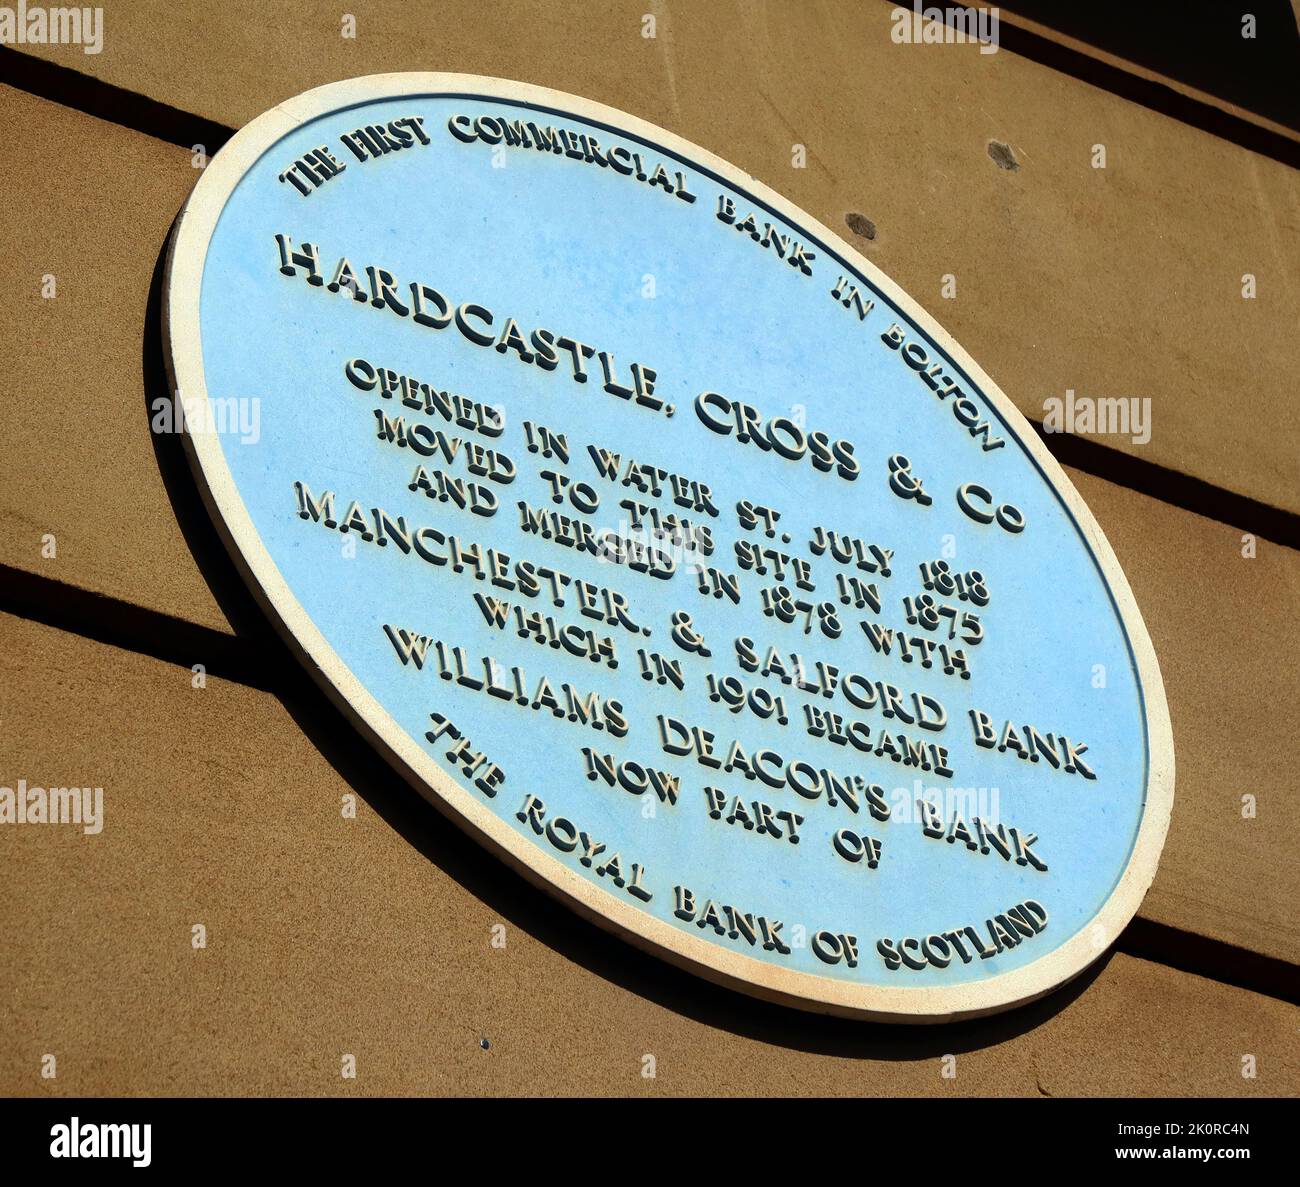 Blue plaque, Hardcastle Cross & Co, first commercial bank in Bolton, Water Street, Greater Manchester, England, UK, BL1 1TR Stock Photo